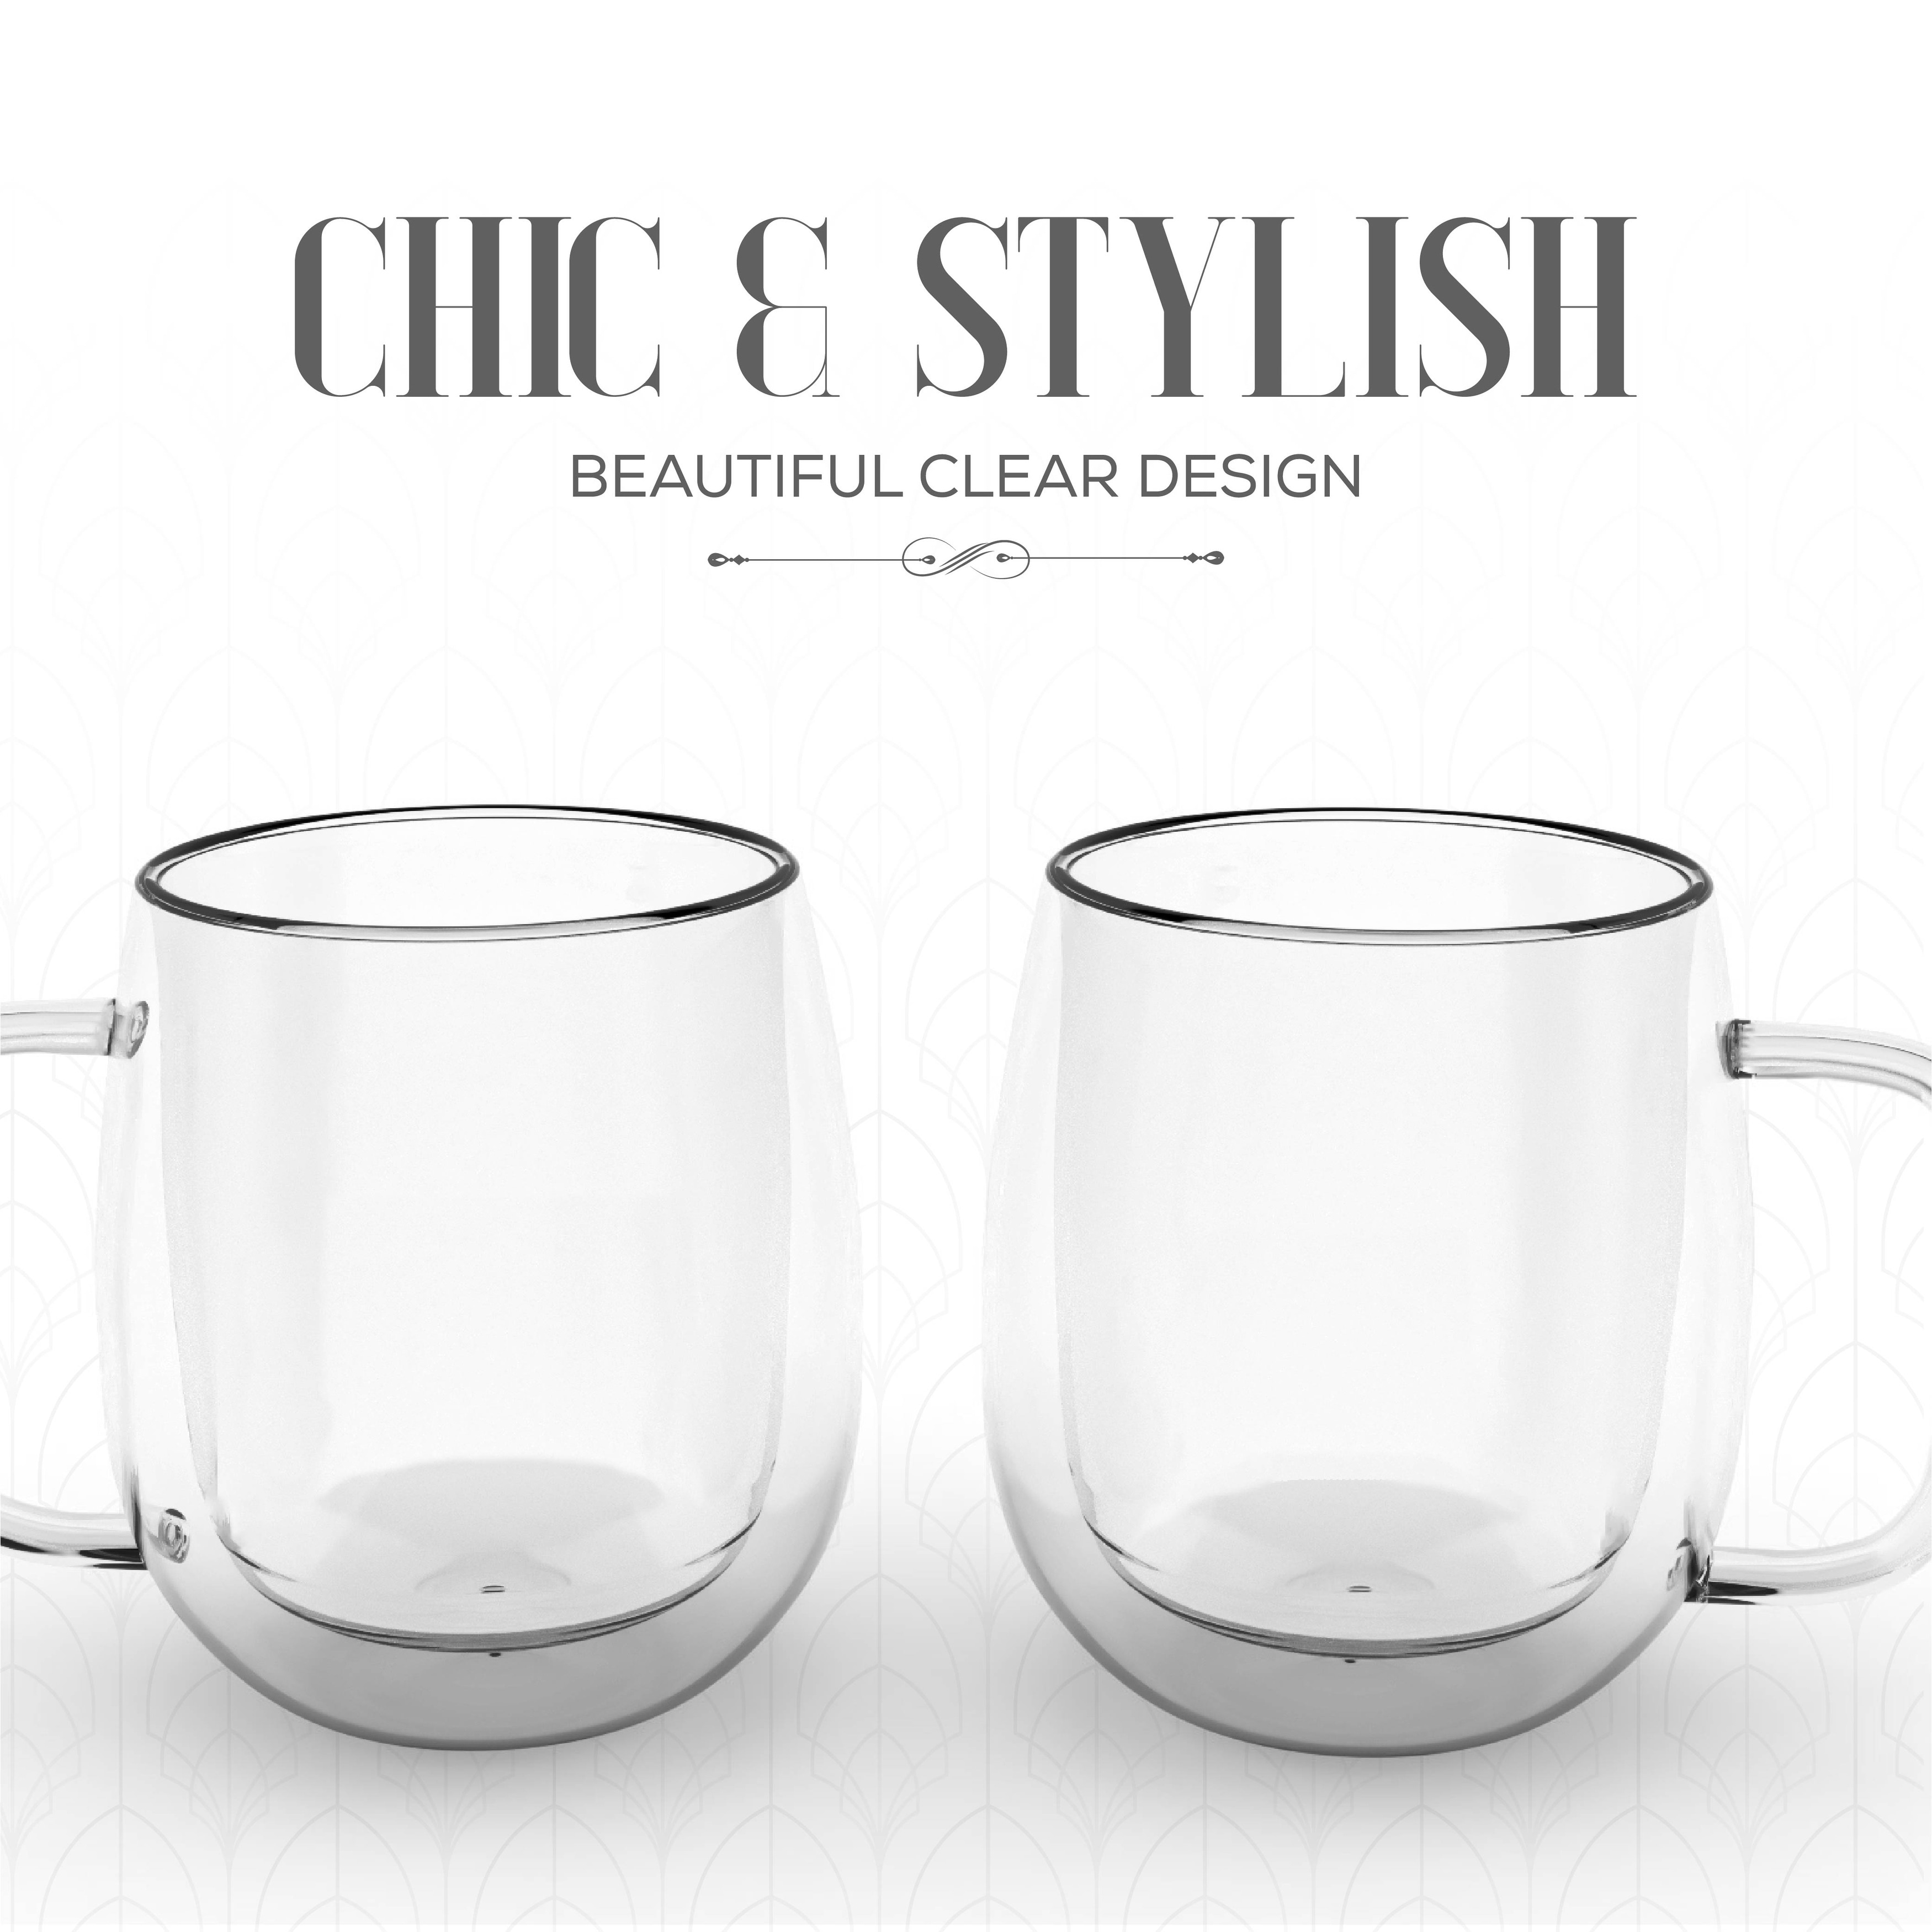 https://ak1.ostkcdn.com/images/products/is/images/direct/1dccc6af55be80f4dcf44dd364962425fc988a0b/Elle-Decor-Double-Wall-Glass-Mugs-Set-of-2-Coffee-Mug.jpg